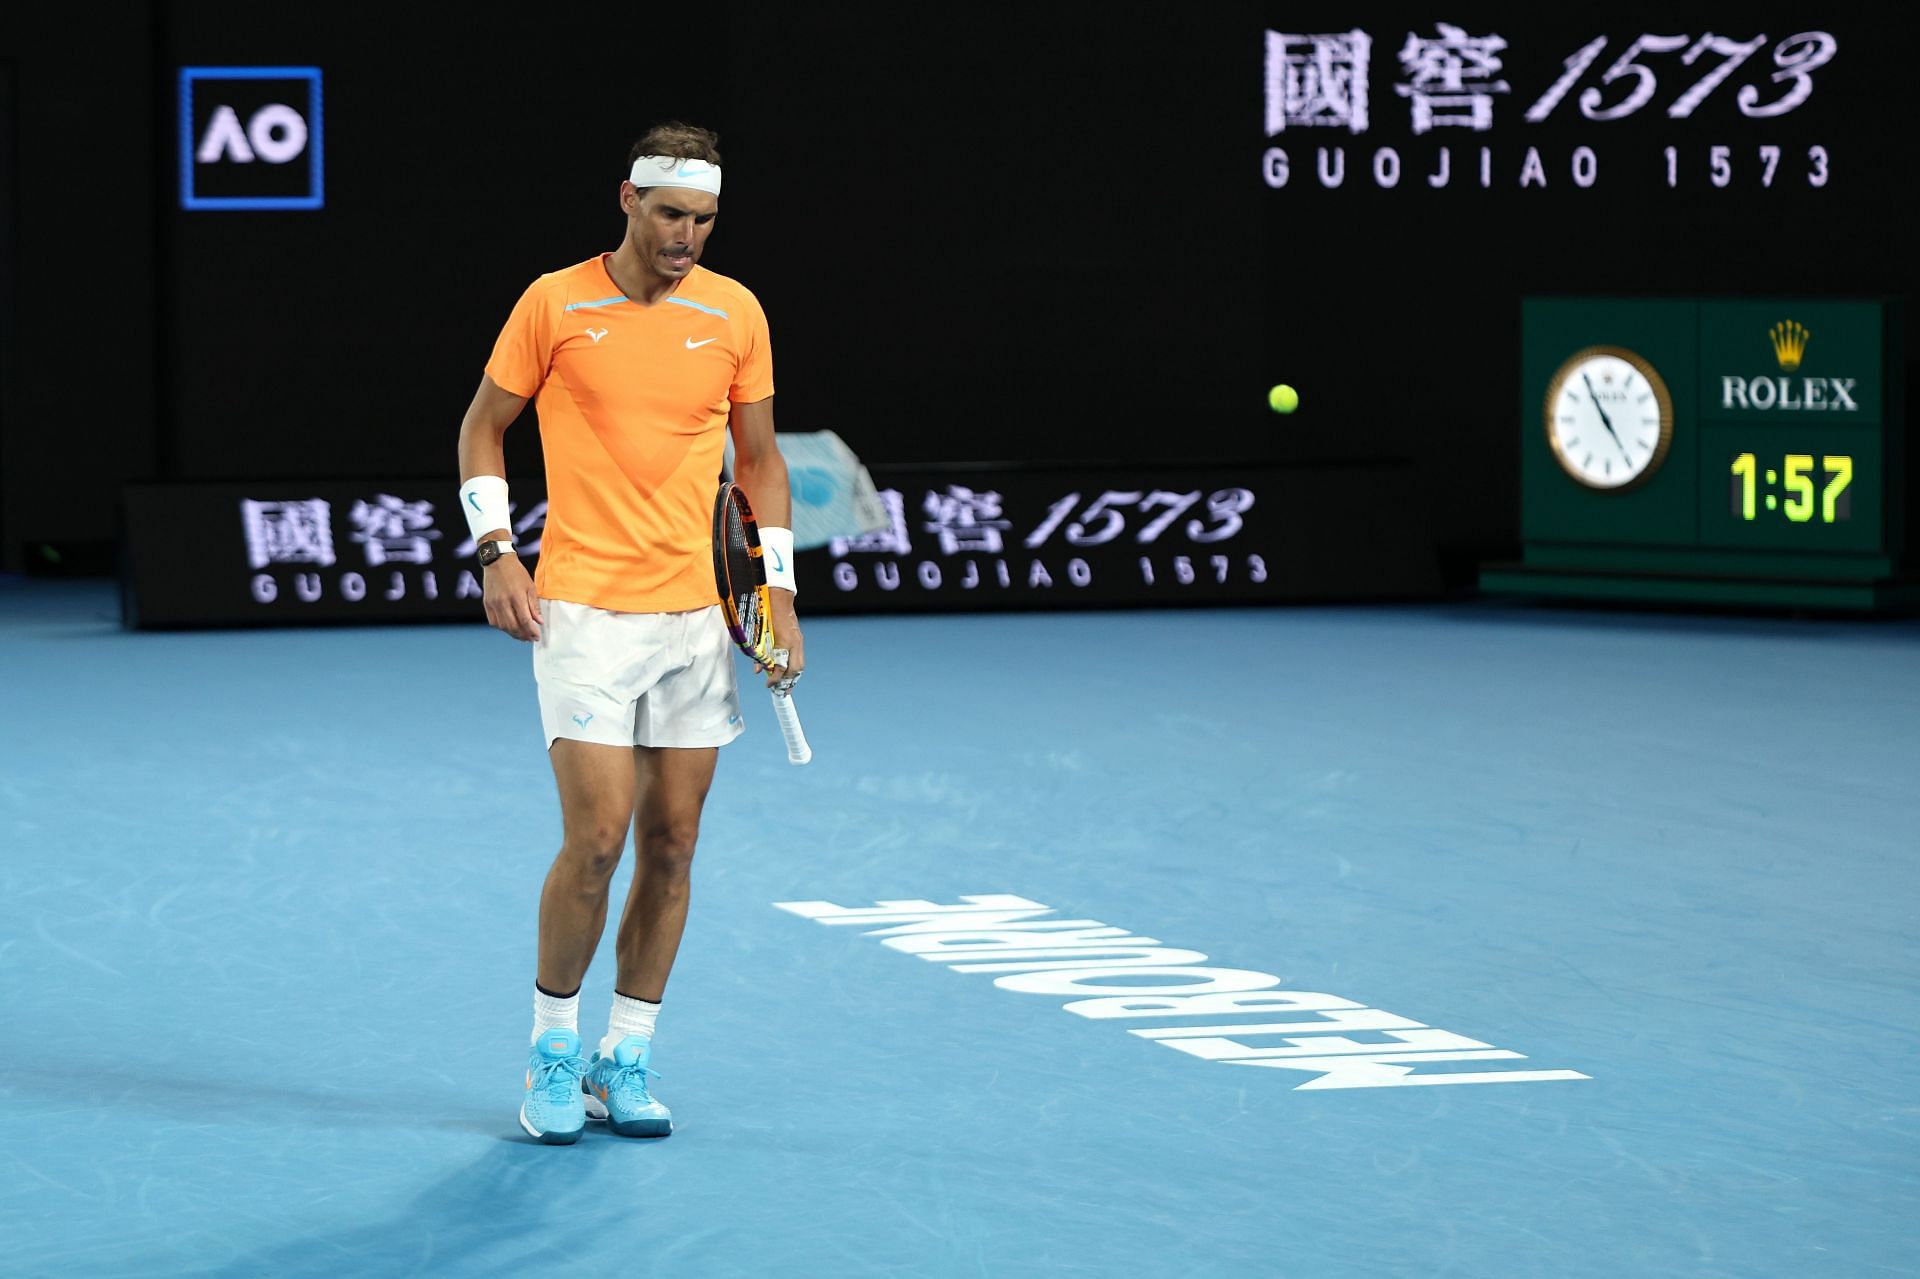 Rafael Nadal exited the top 10 of the ATP rankings after 18 years.